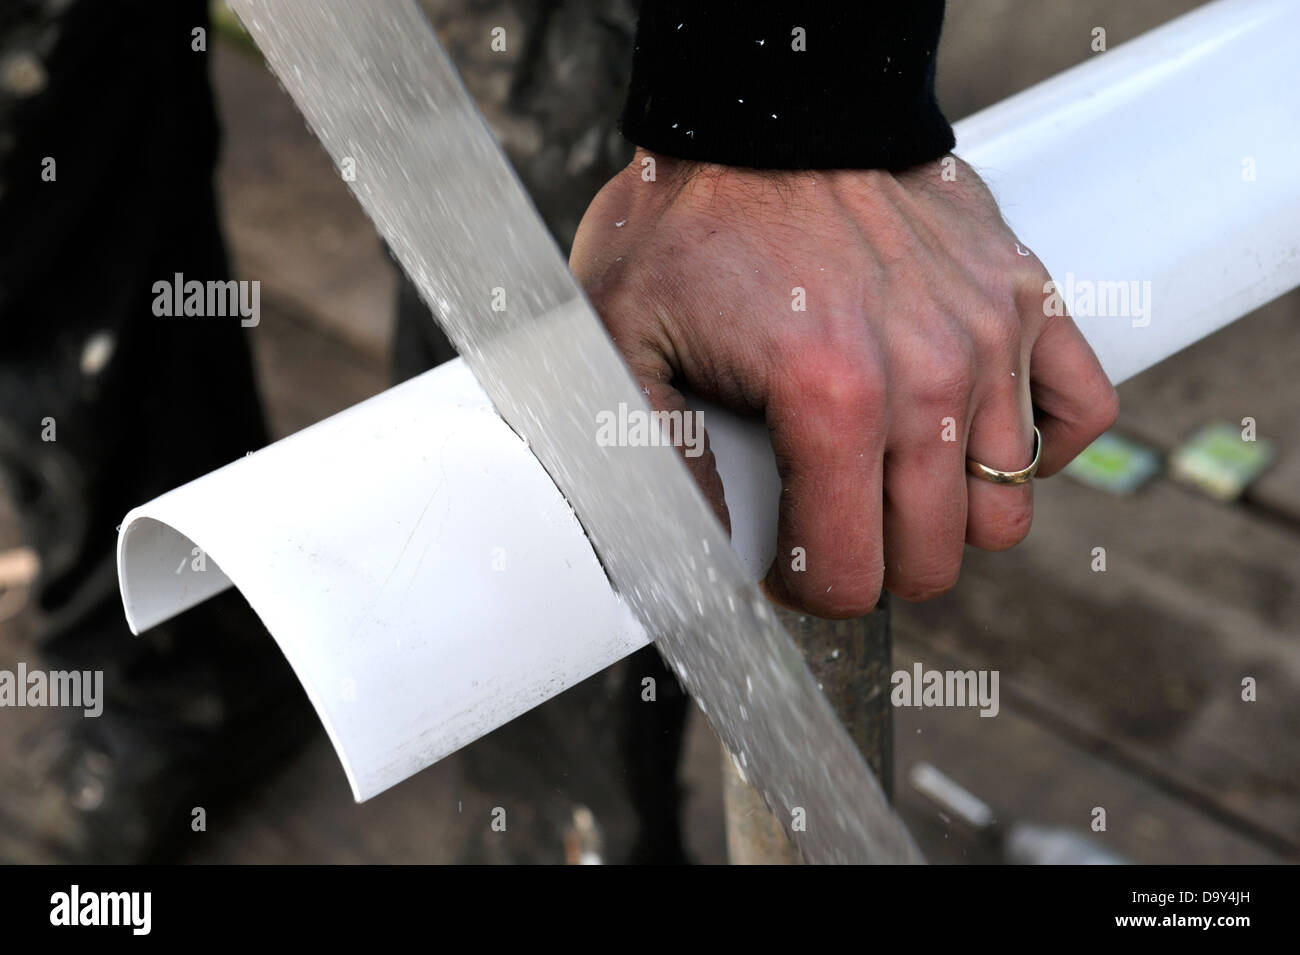 Builder sawing plastic rainwater gutter to length Stock Photo